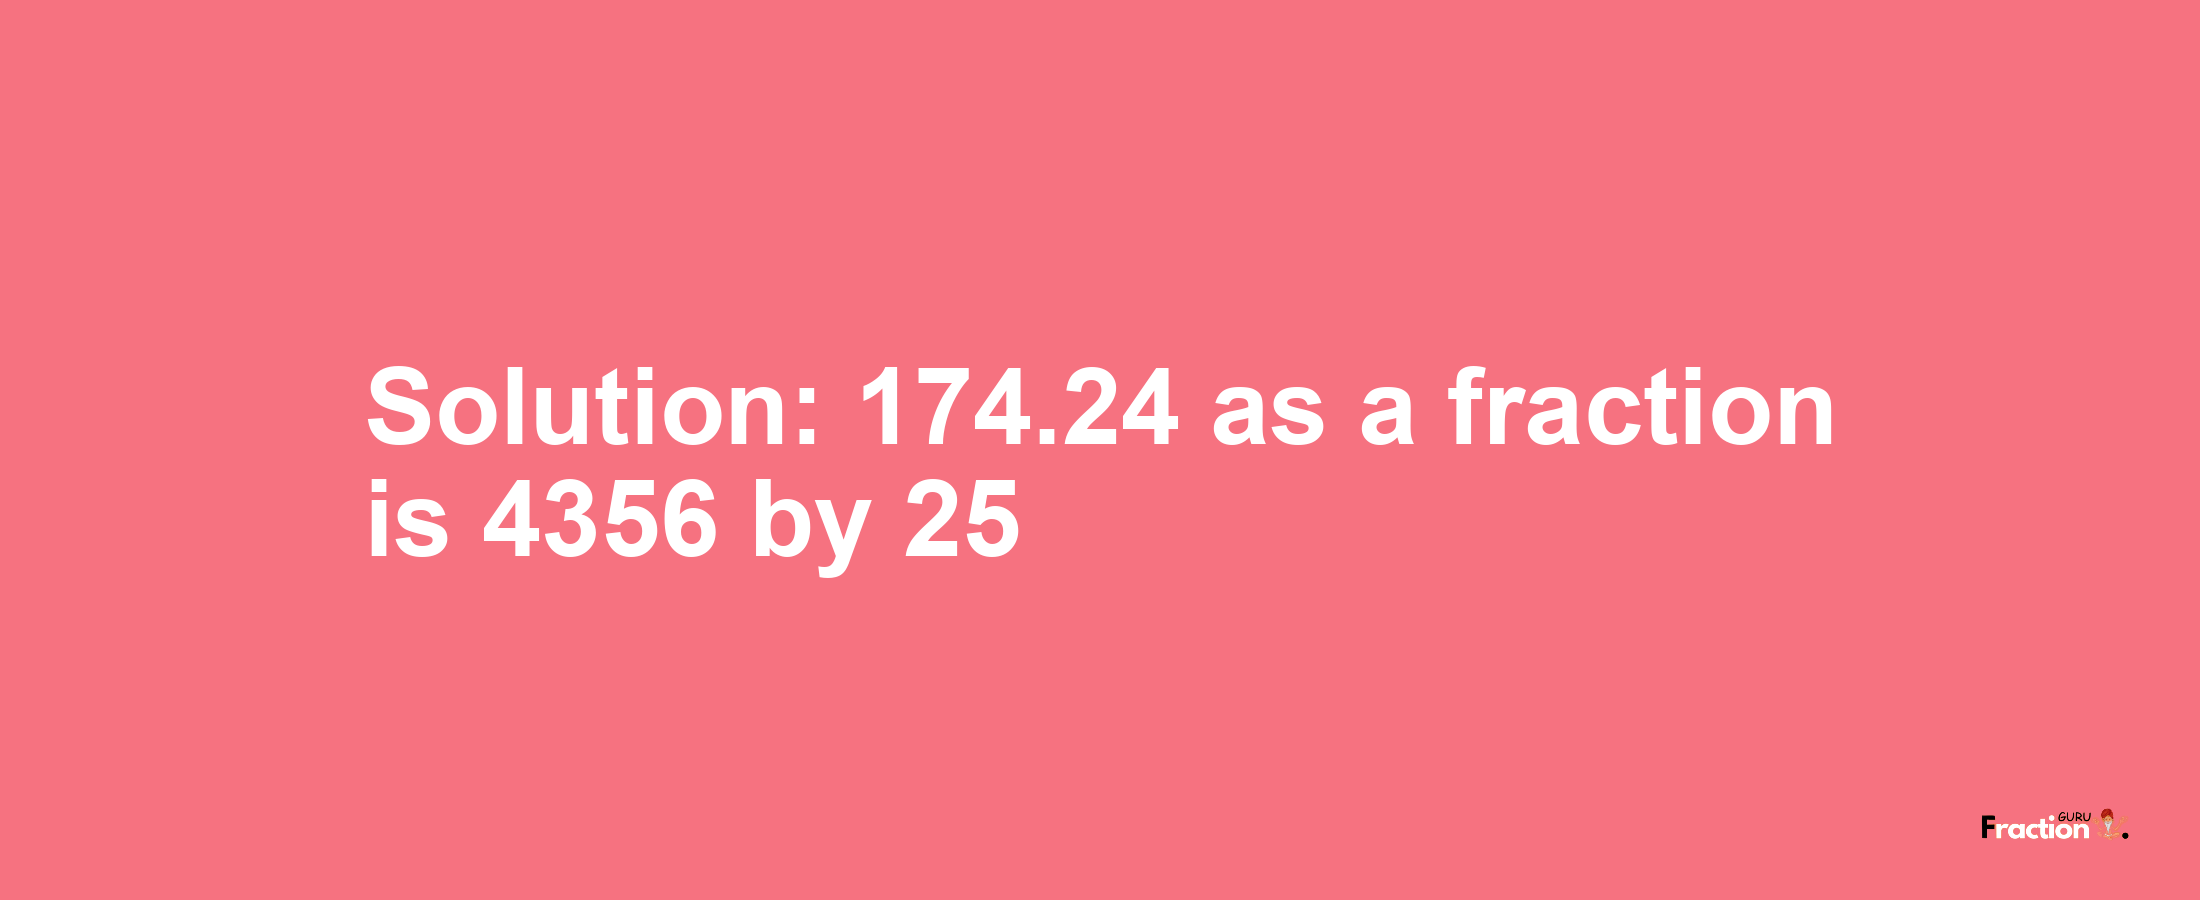 Solution:174.24 as a fraction is 4356/25